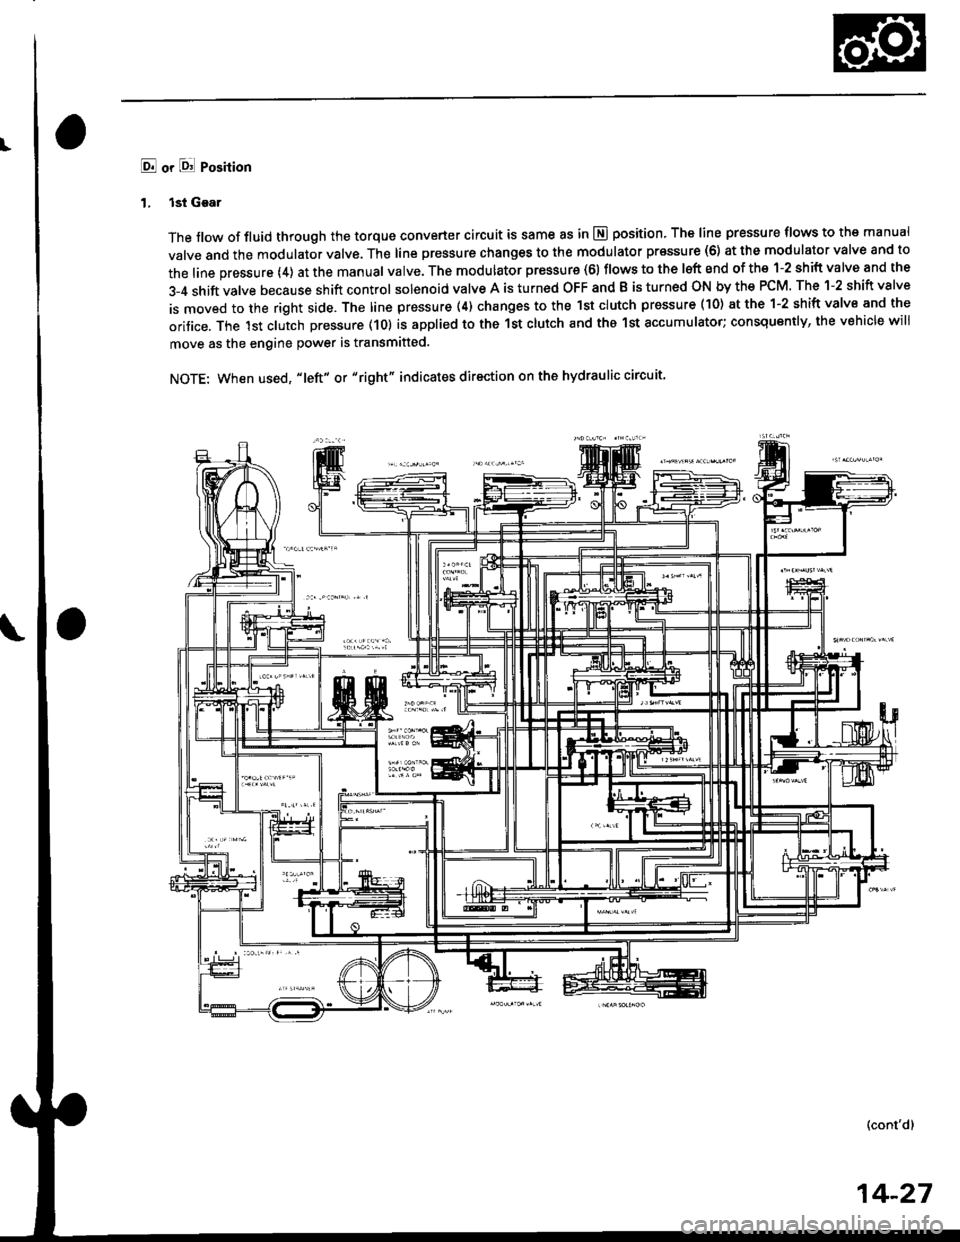 HONDA CIVIC 1998 6.G Workshop Manual E! or l8! Position
1. lst Gear
The flow of fluid through the torque converter circuit is same as in E position, The line pressure tlows to the manual
valve and the modulator valve. The line pressure c